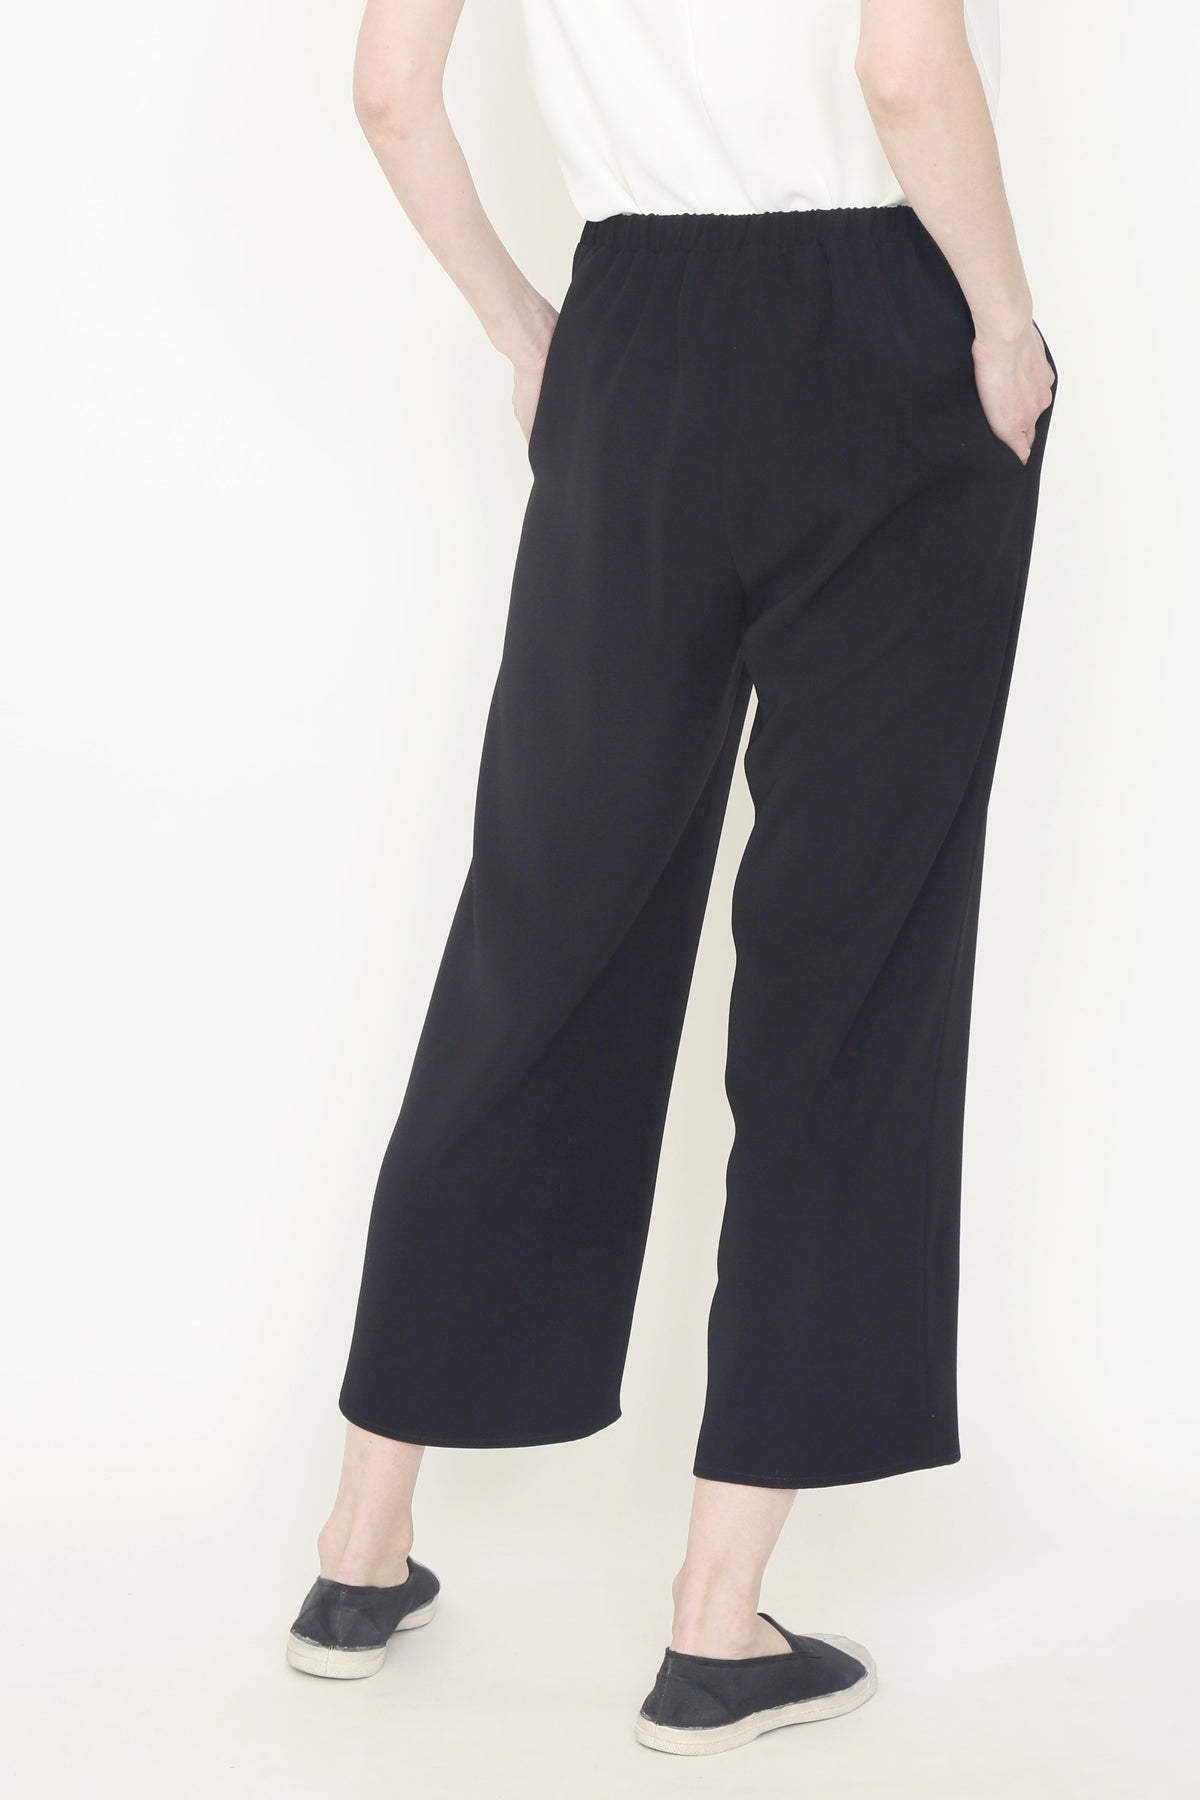 Smart Gab Microfiber Flat Front Pant with Elasticated Back Waist-4